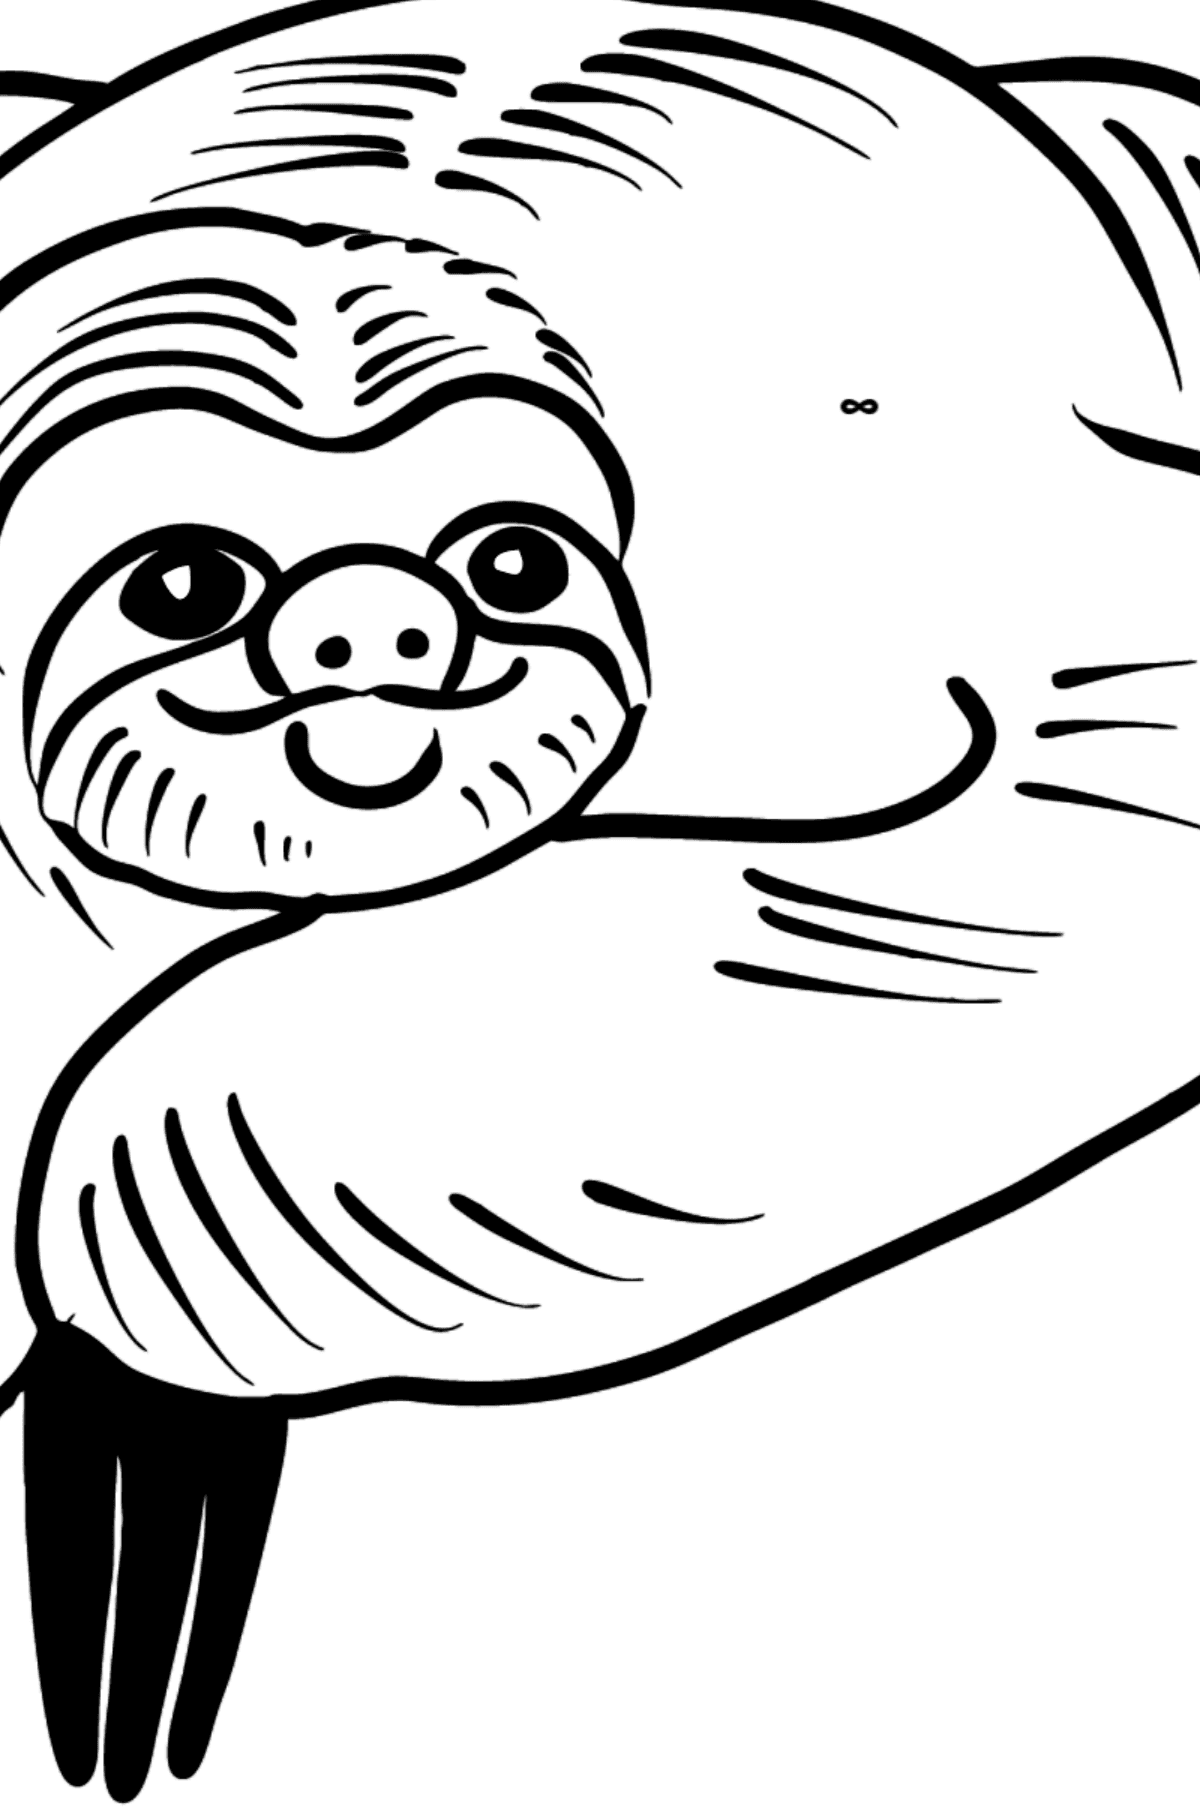 Sloth coloring page - Coloring by Symbols for Kids